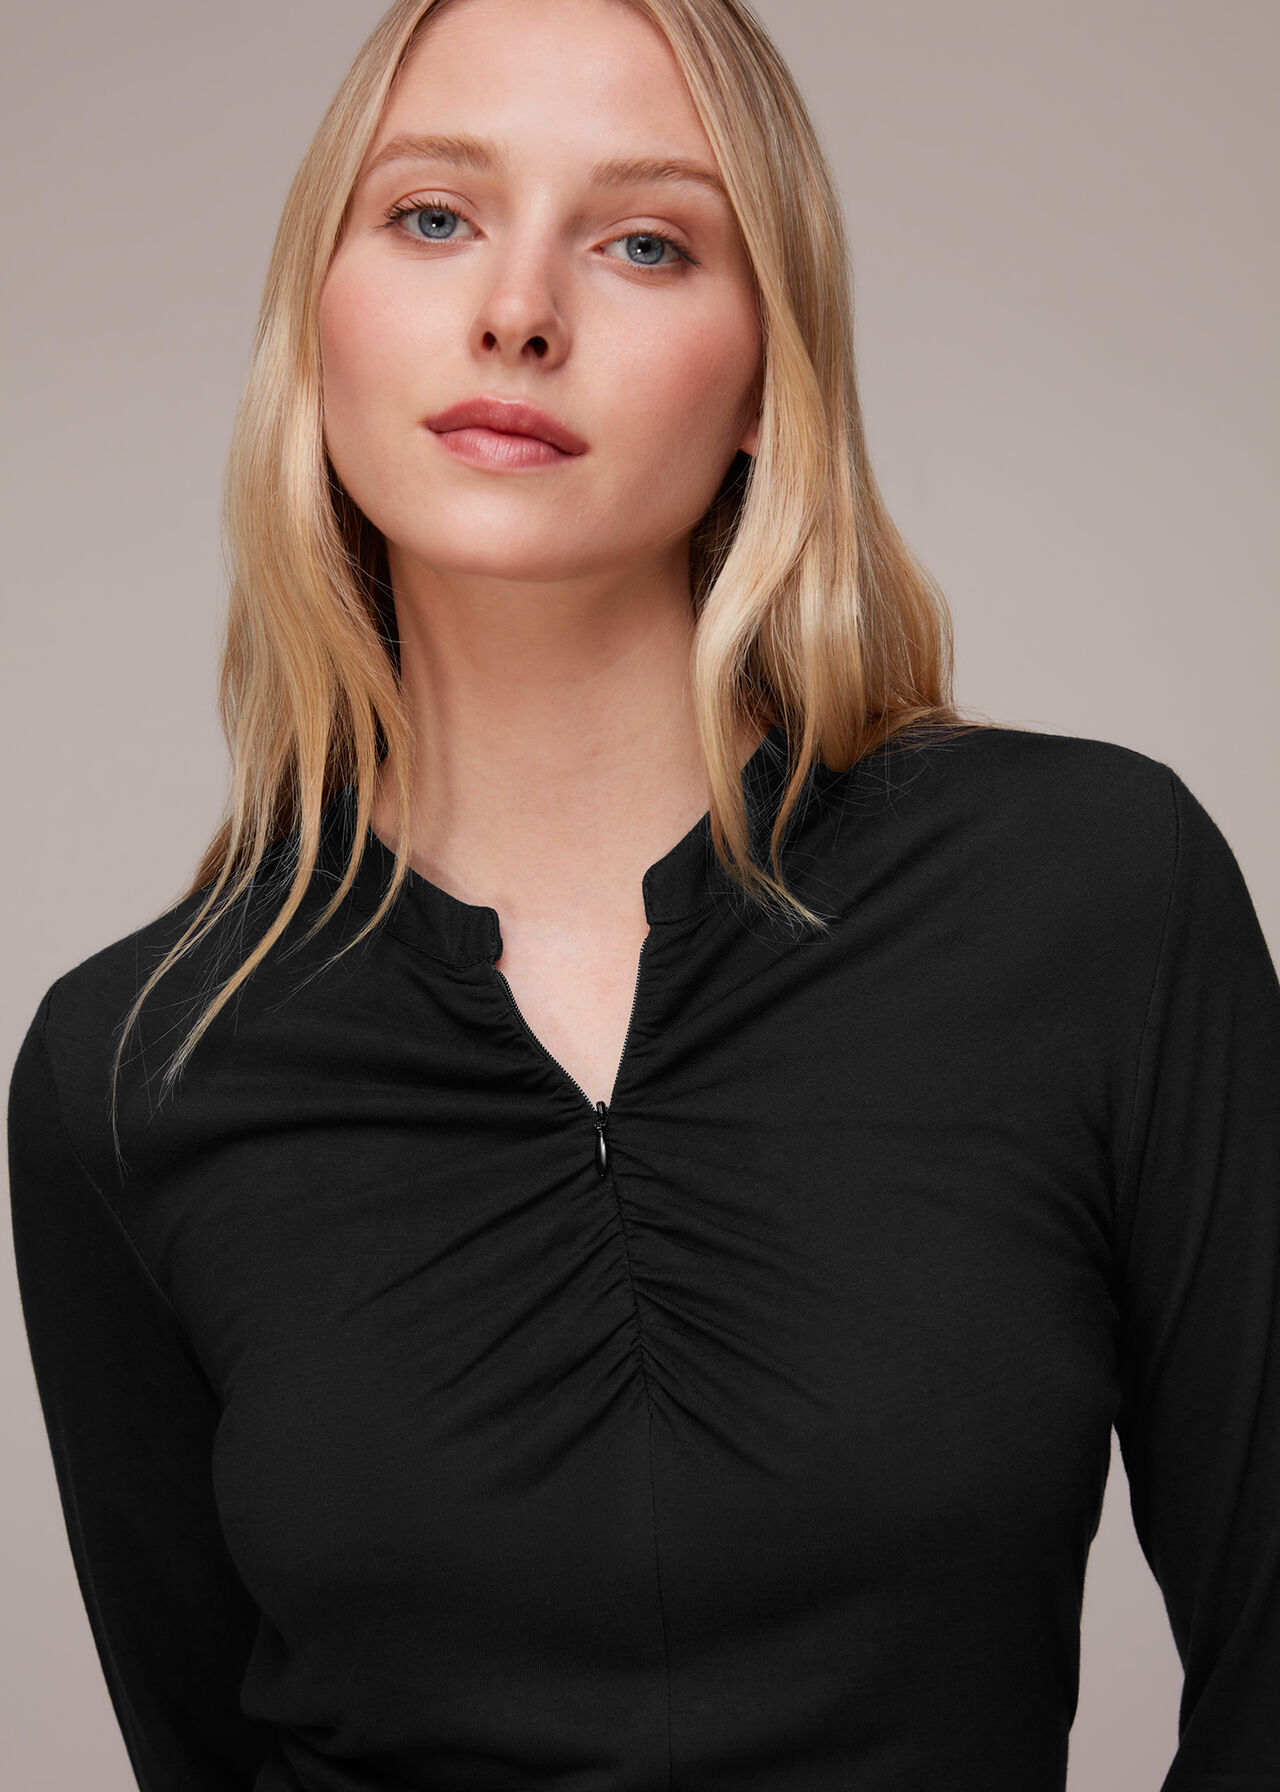 Black Ruched Zip Neck Top | WHISTLES